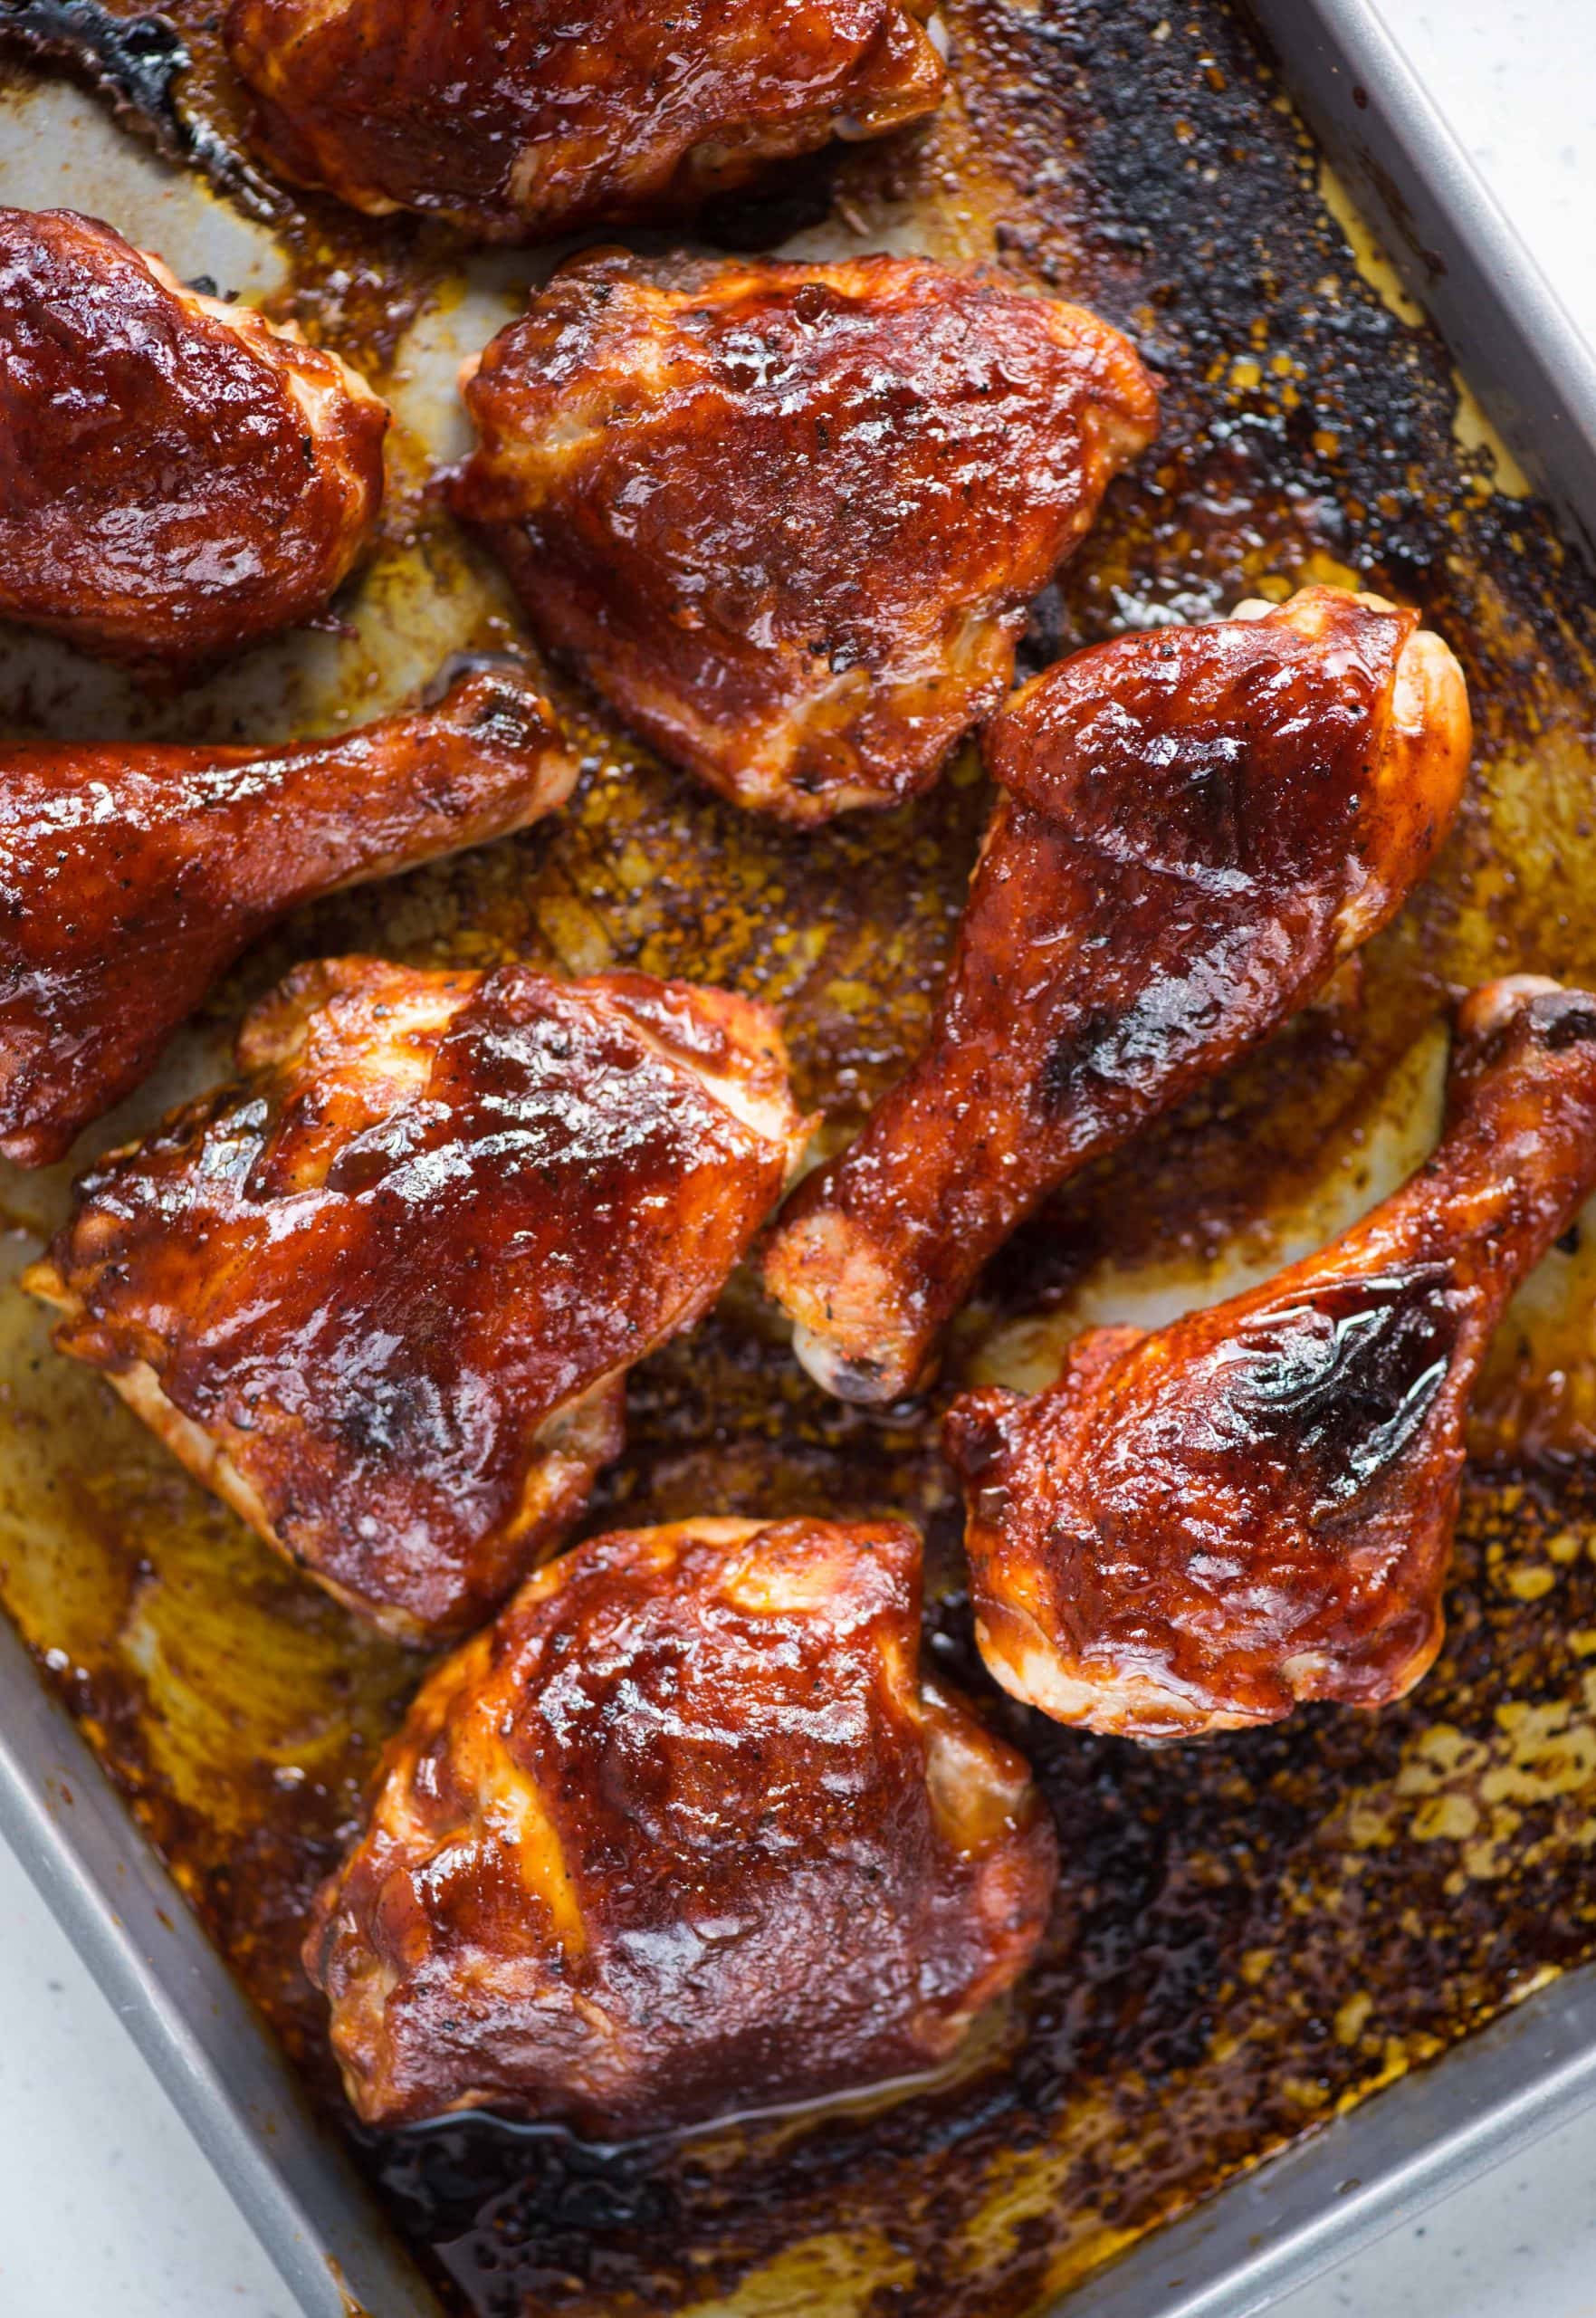 How long do u cook bbq chicken in the oven Bbq Chicken In Oven In 3 Easy Steps The Flavours Of Kitchen